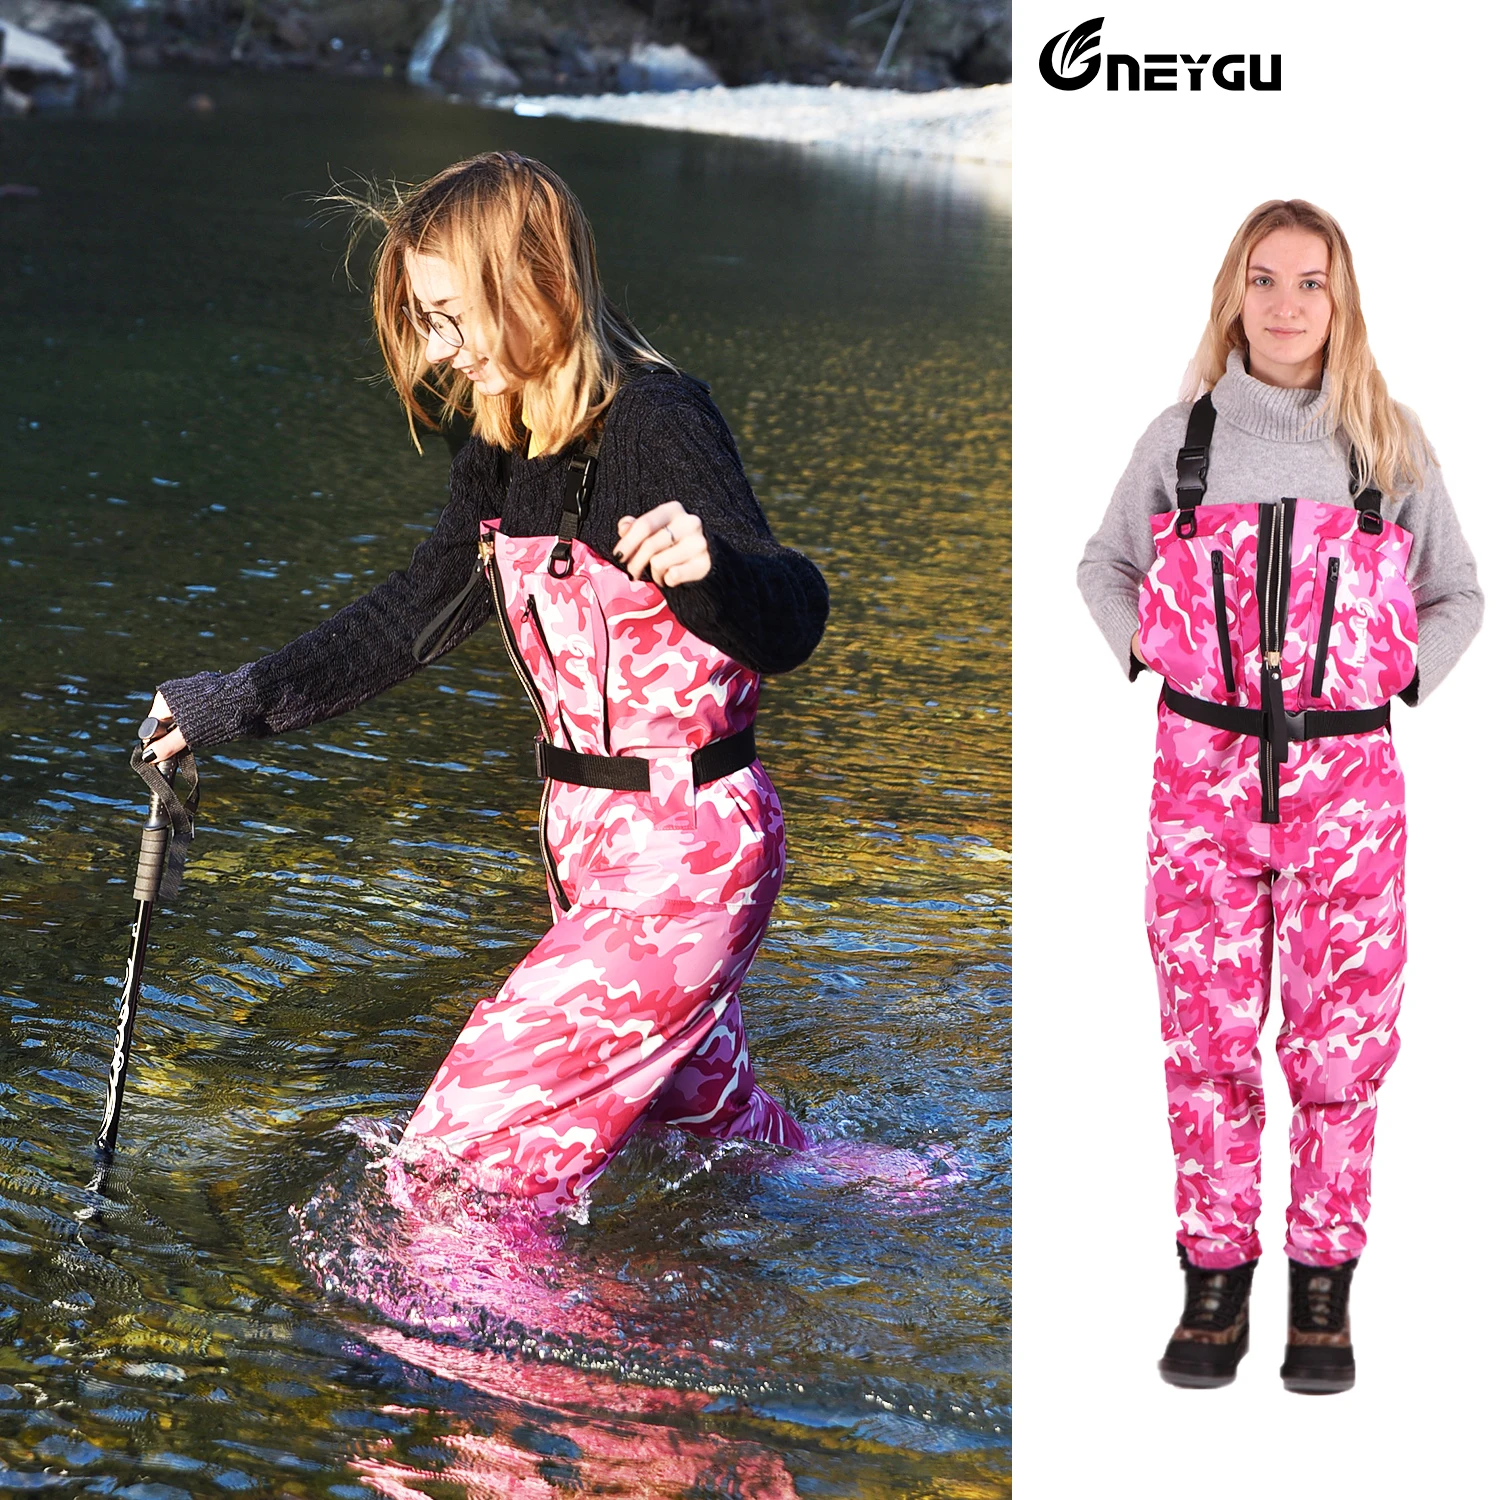 NEYGU waist-high waterproof breathable Overalls fishing waders with  Reach-through hand warmer pocket for men and women - AliExpress